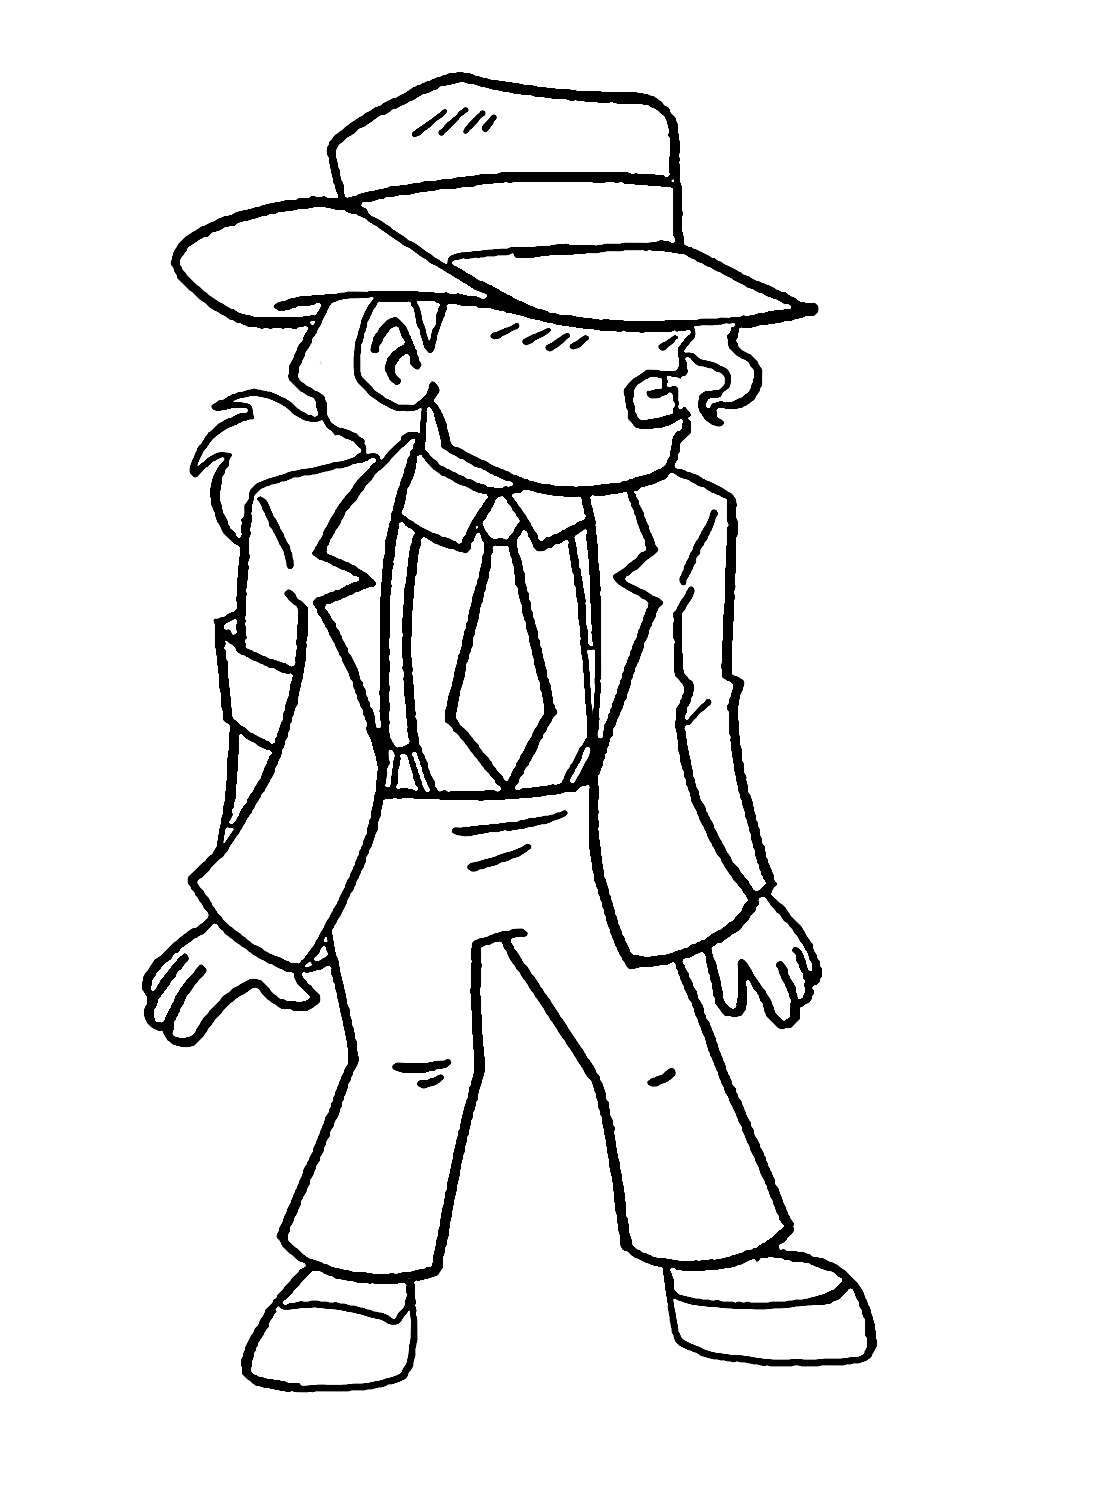 Funny Michael Jackson Coloring Page